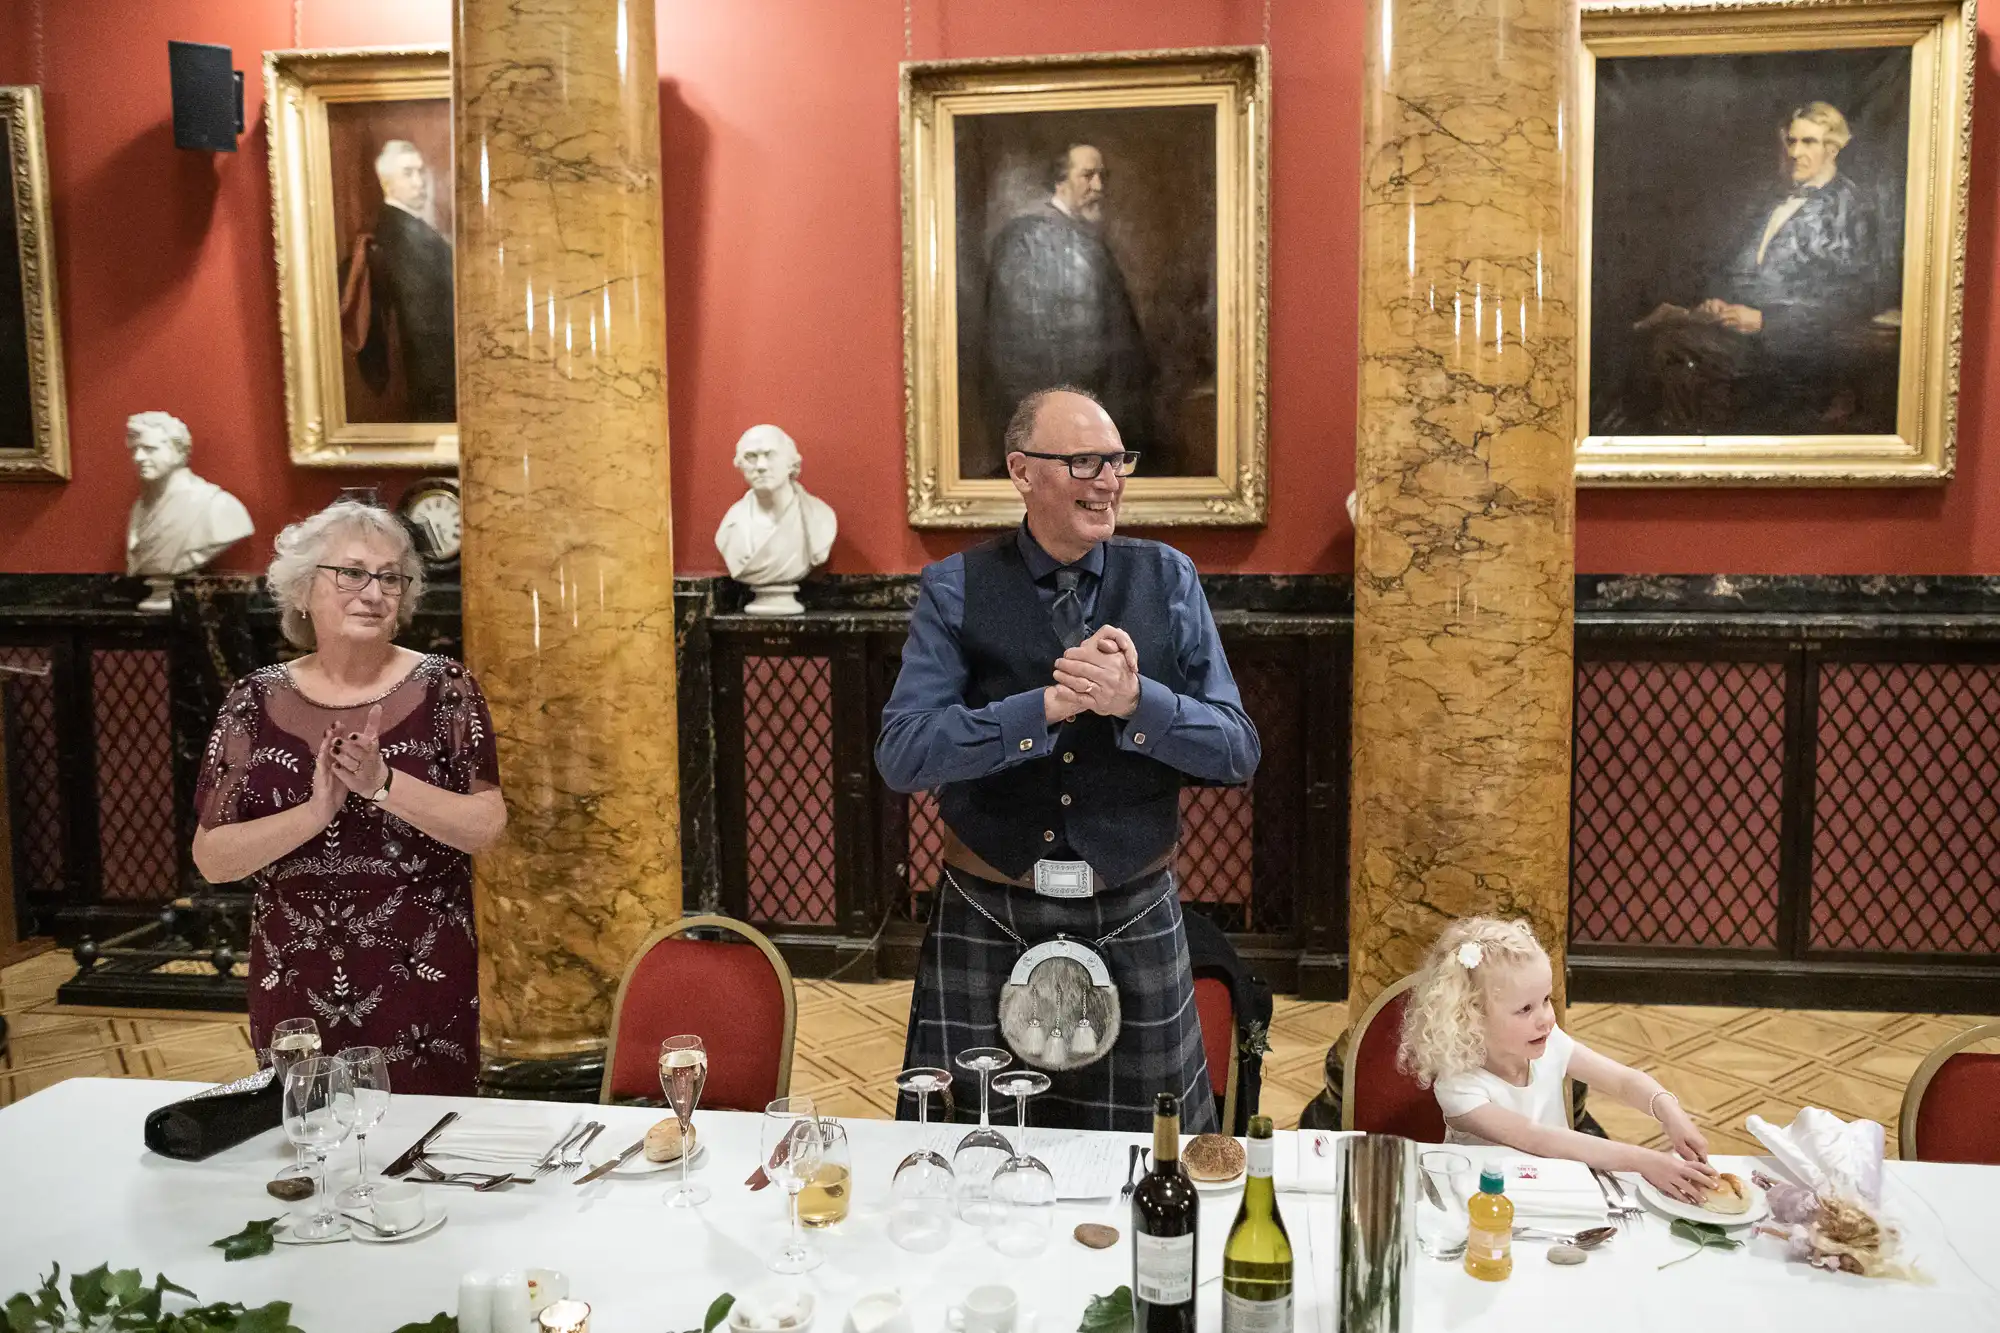 An elderly man in a kilt stands clapping between an elderly woman and a young girl seated at a table with food and drinks in a room decorated with portraits and marble columns.